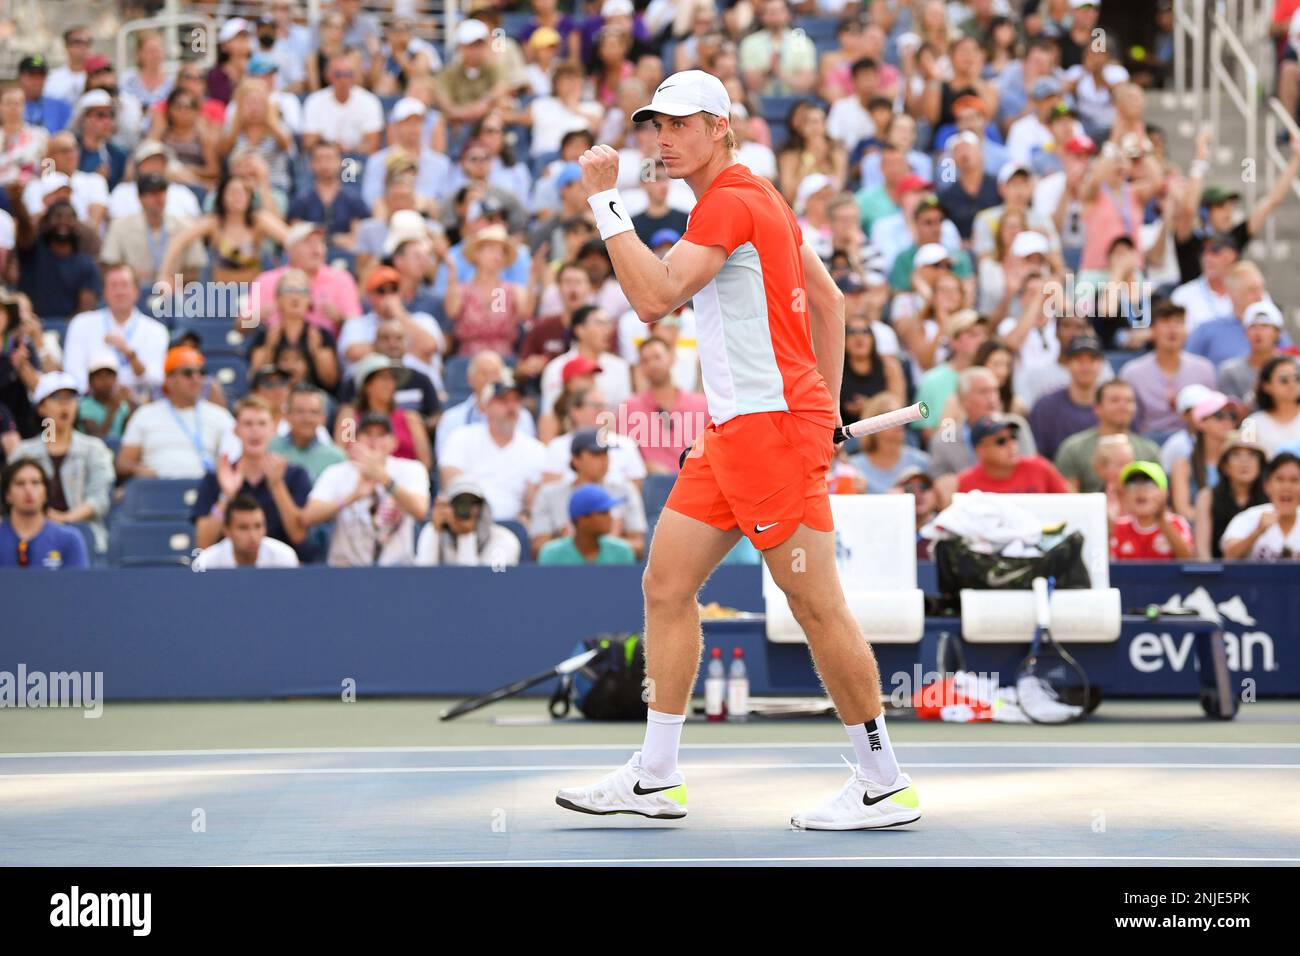 Denis Shapovalov in action during a mens singles match at the 2022 US Open, Saturday, Sep